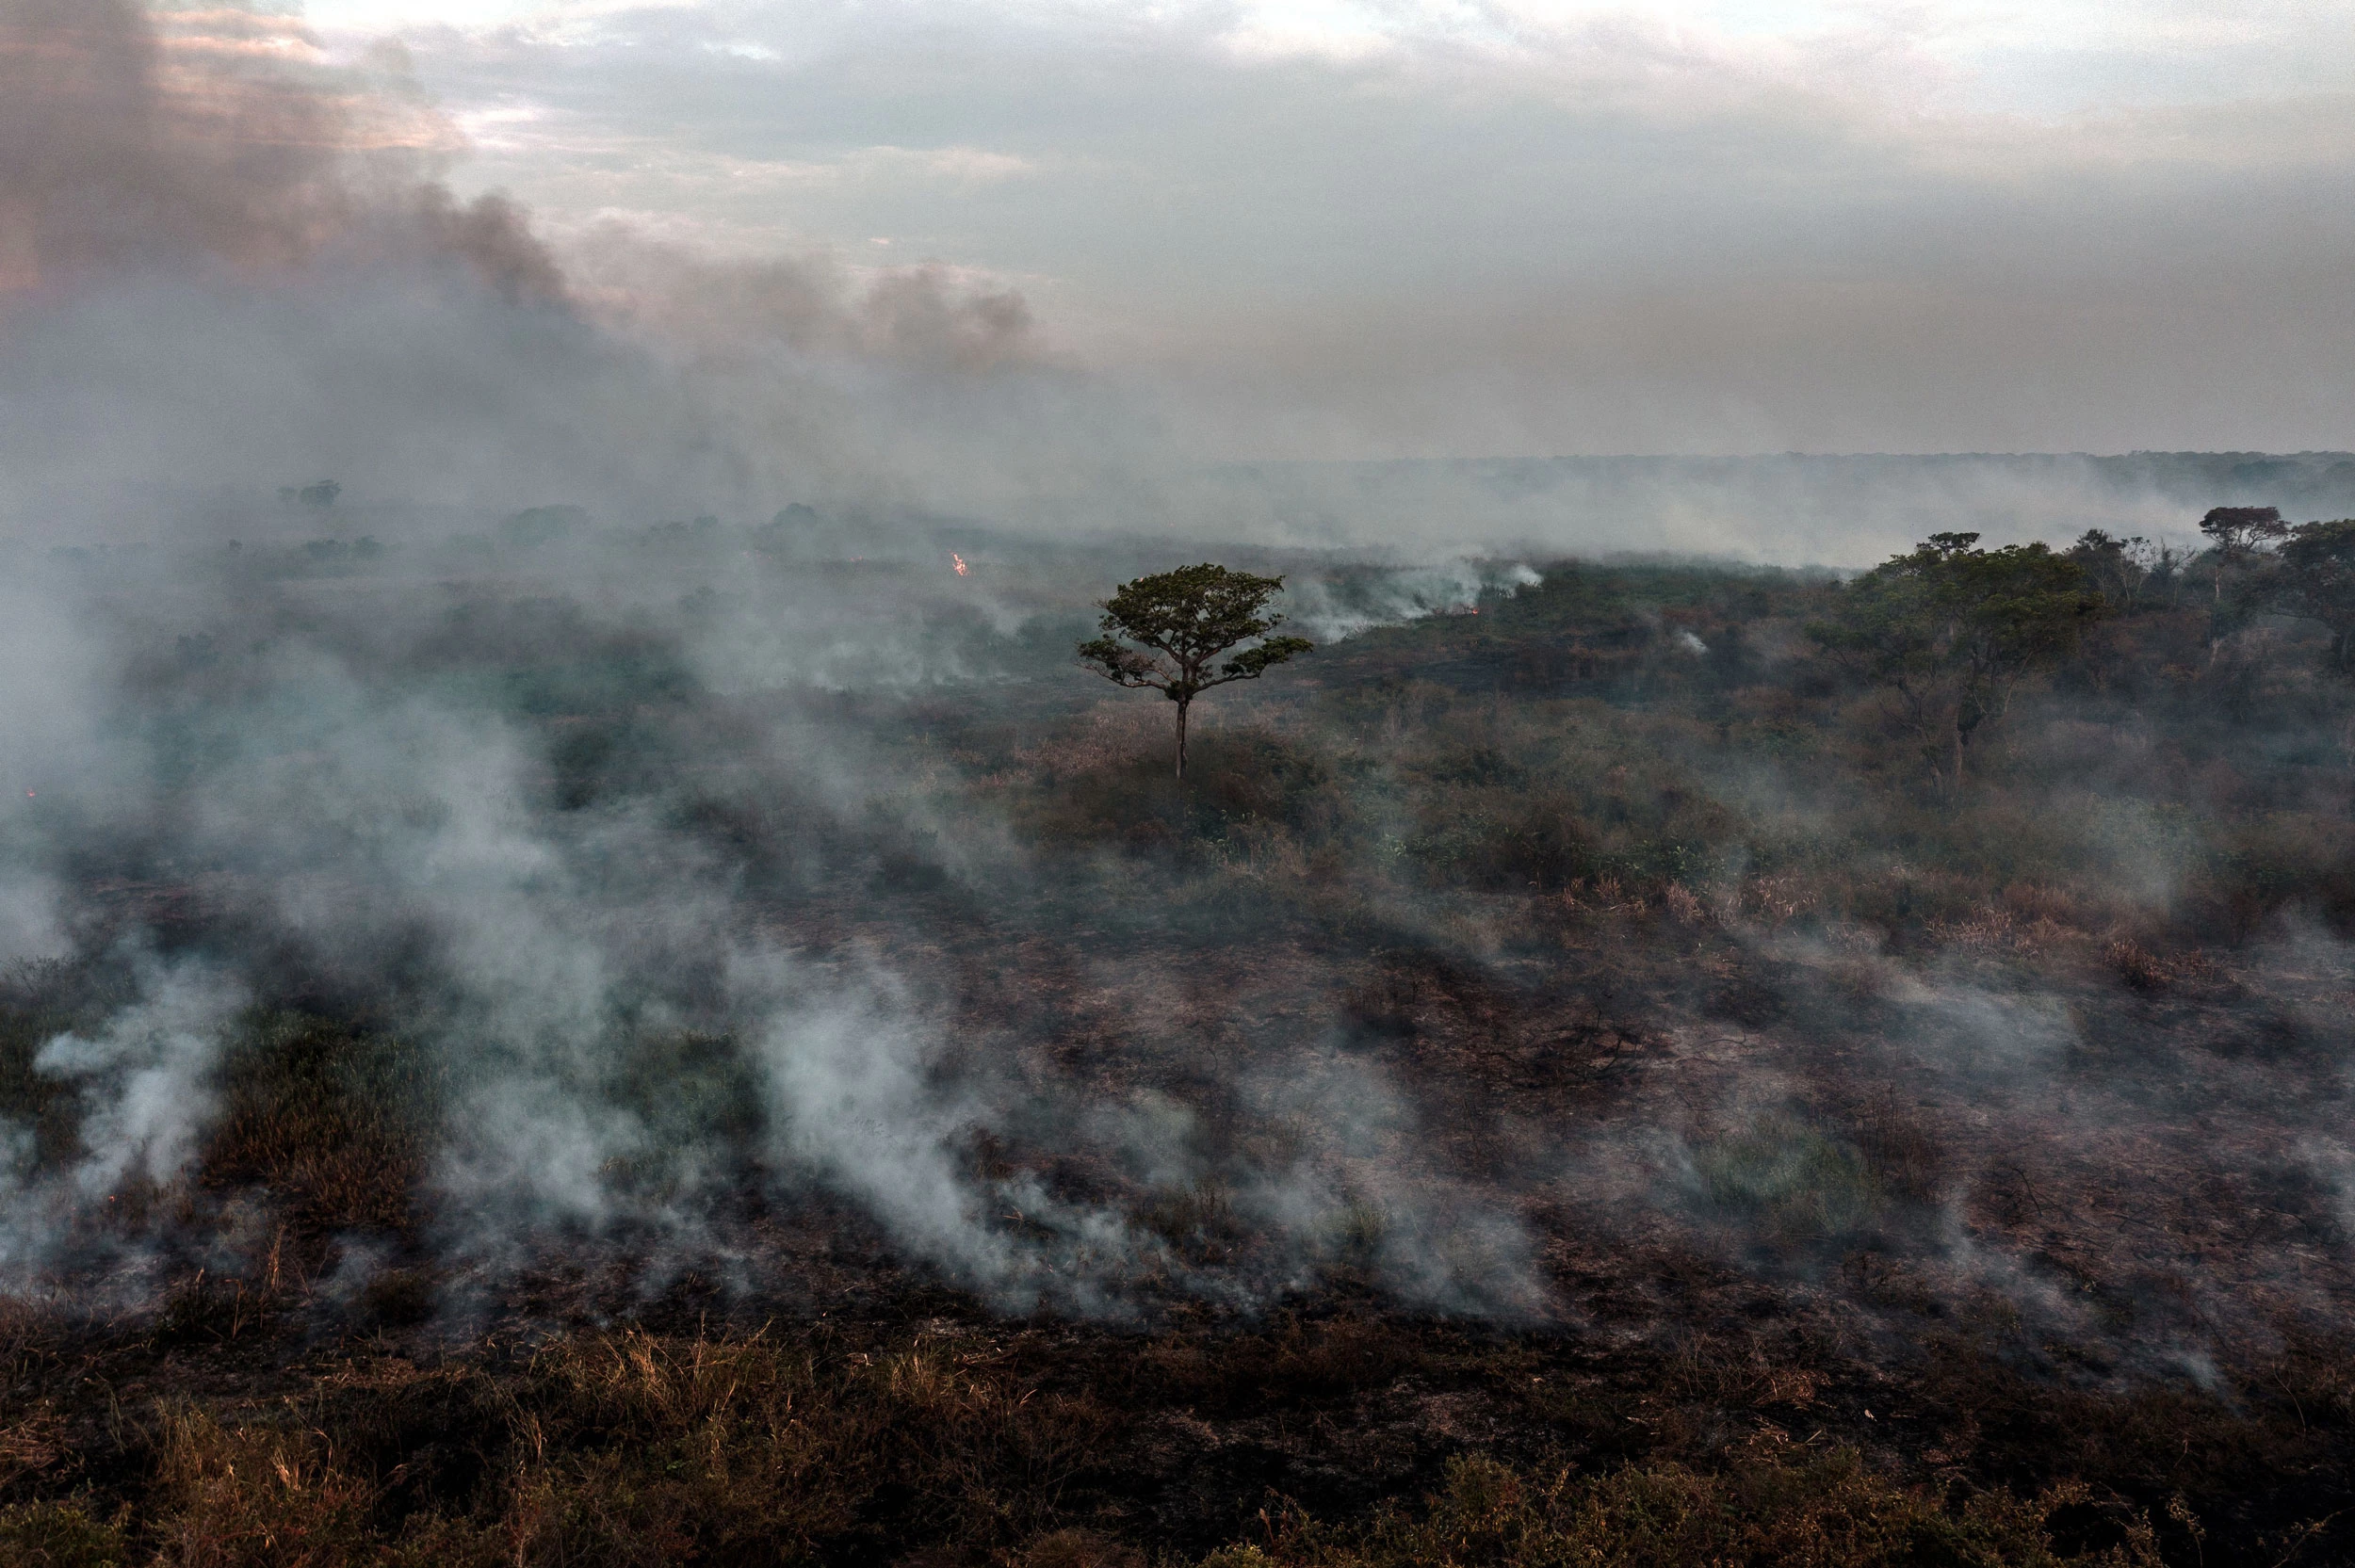 TOPSHOT - Aerial view of a forest fire in Porto Jofre, Pantanal, Mato Grosso state, Brazil, on September 5, 2021. - The Amazon basin has, until recently, absorbed large amounts of humankind's ballooning carbon emissions, helping stave off the nightmare of unchecked climate change. But studies indicate the rainforest is hurtling toward a "tipping point," at which it will dry up and turn to savannah, its 390 billion trees dying off en masse. Already, the destruction is quickening, especially since far-right President Jair Bolsonaro took office in 2019 in Brazil -- home to 60 percent of the Amazon -- with a push to open protected lands to agribusiness and mining. (Photo by CARL DE SOUZA / AFP) (Photo by CARL DE SOUZA/AFP via Getty Images)